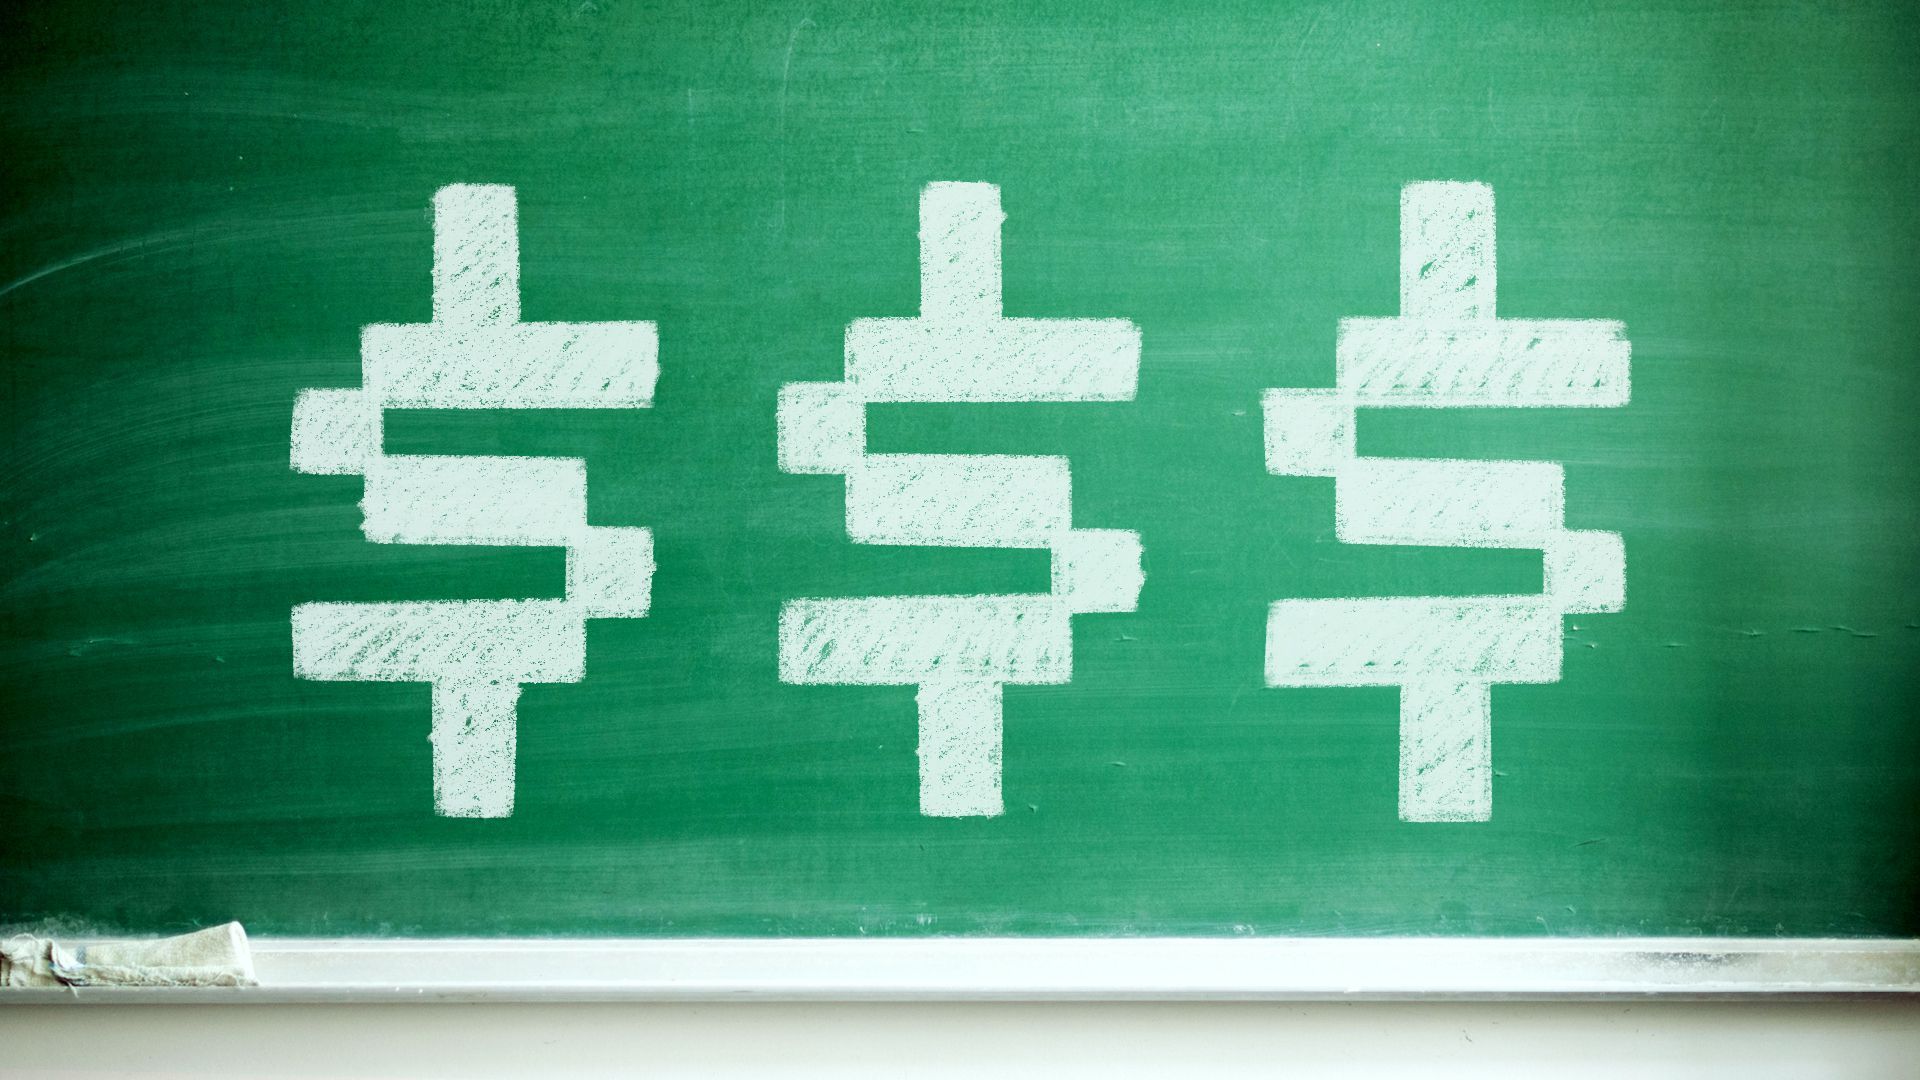 Illustration of a chalkboard with three dollar signs drawn on it.